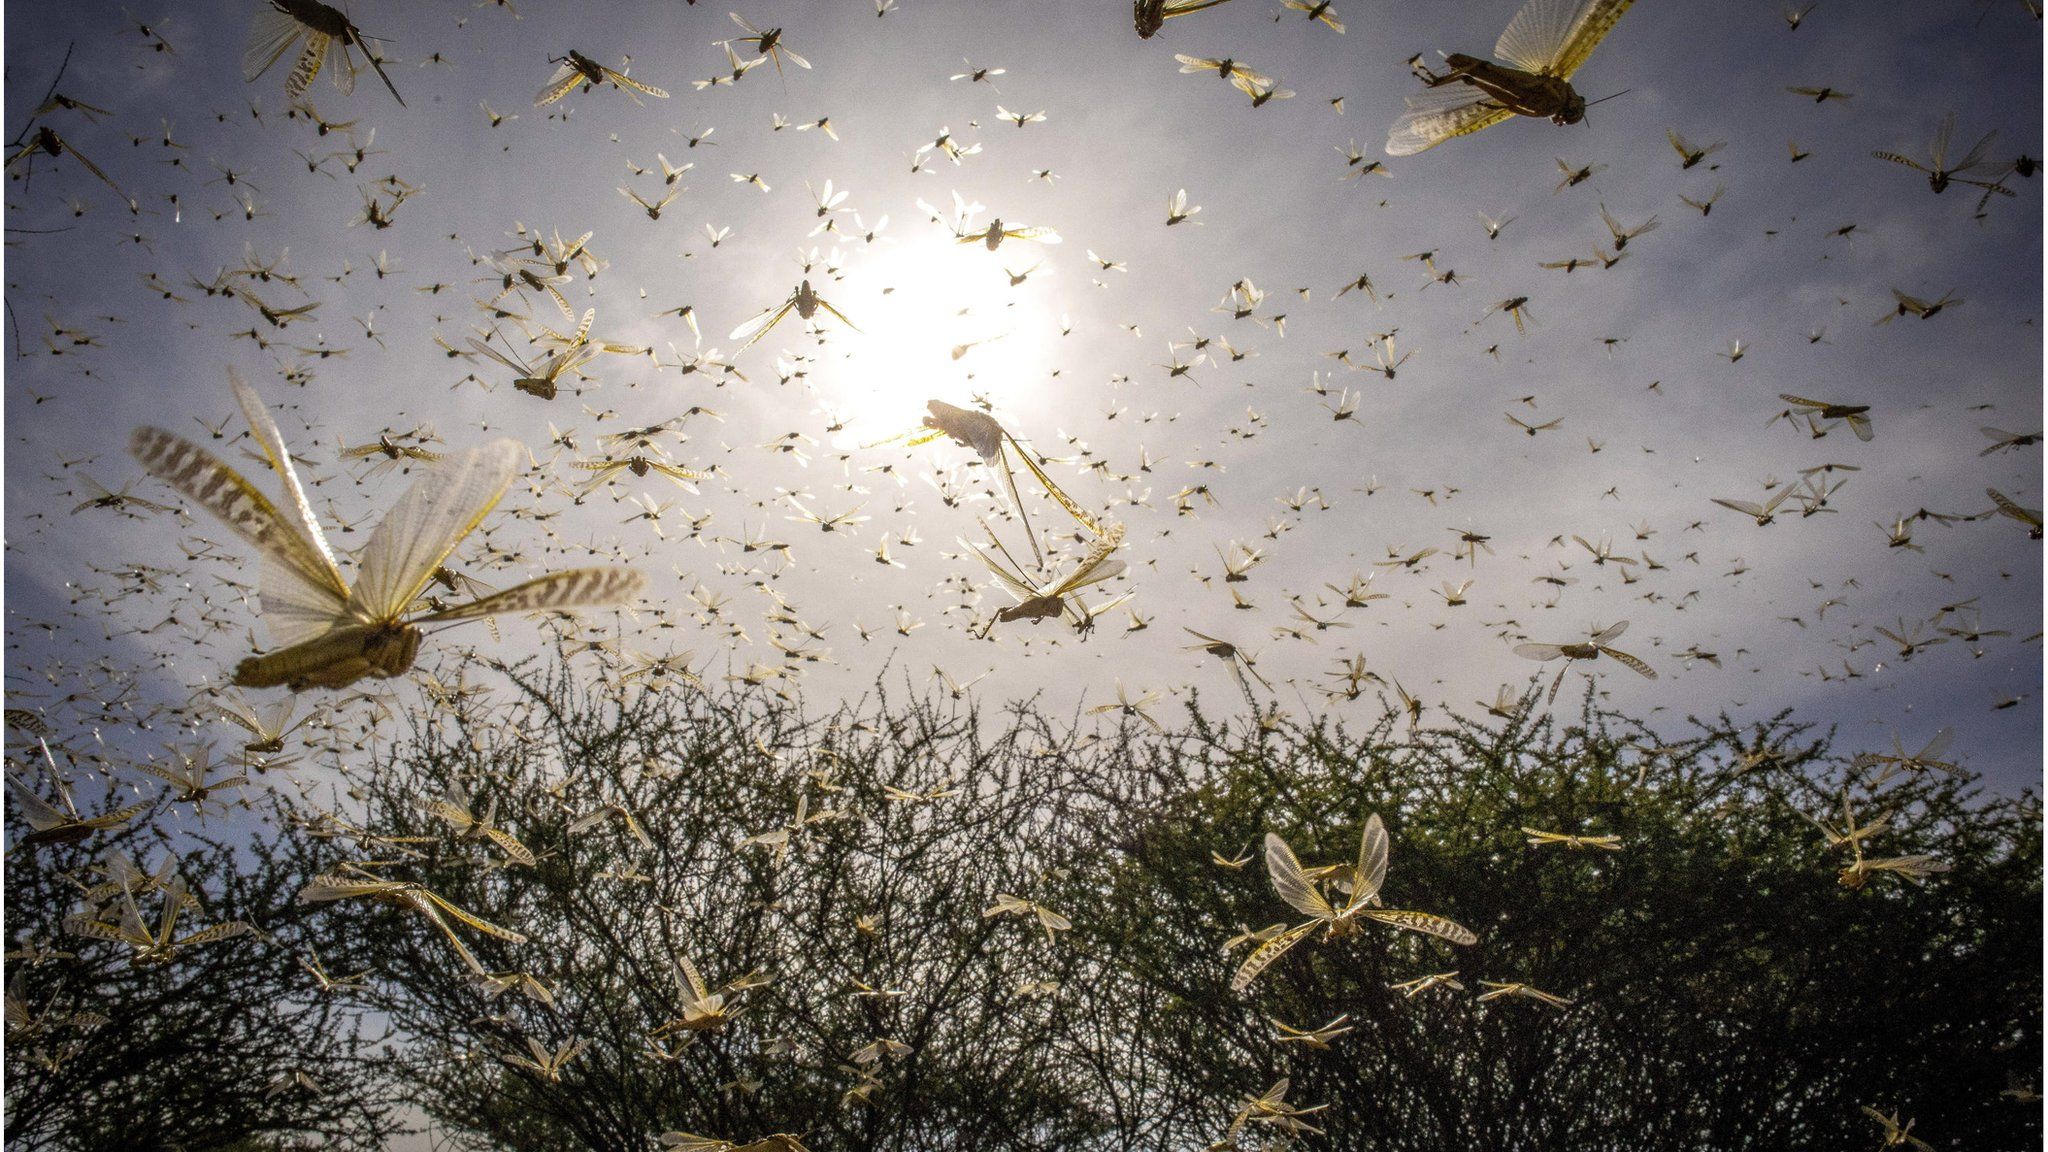 A UN Food and Agriculture Organization handout photo of locusts swarms in East Africa, January 2020